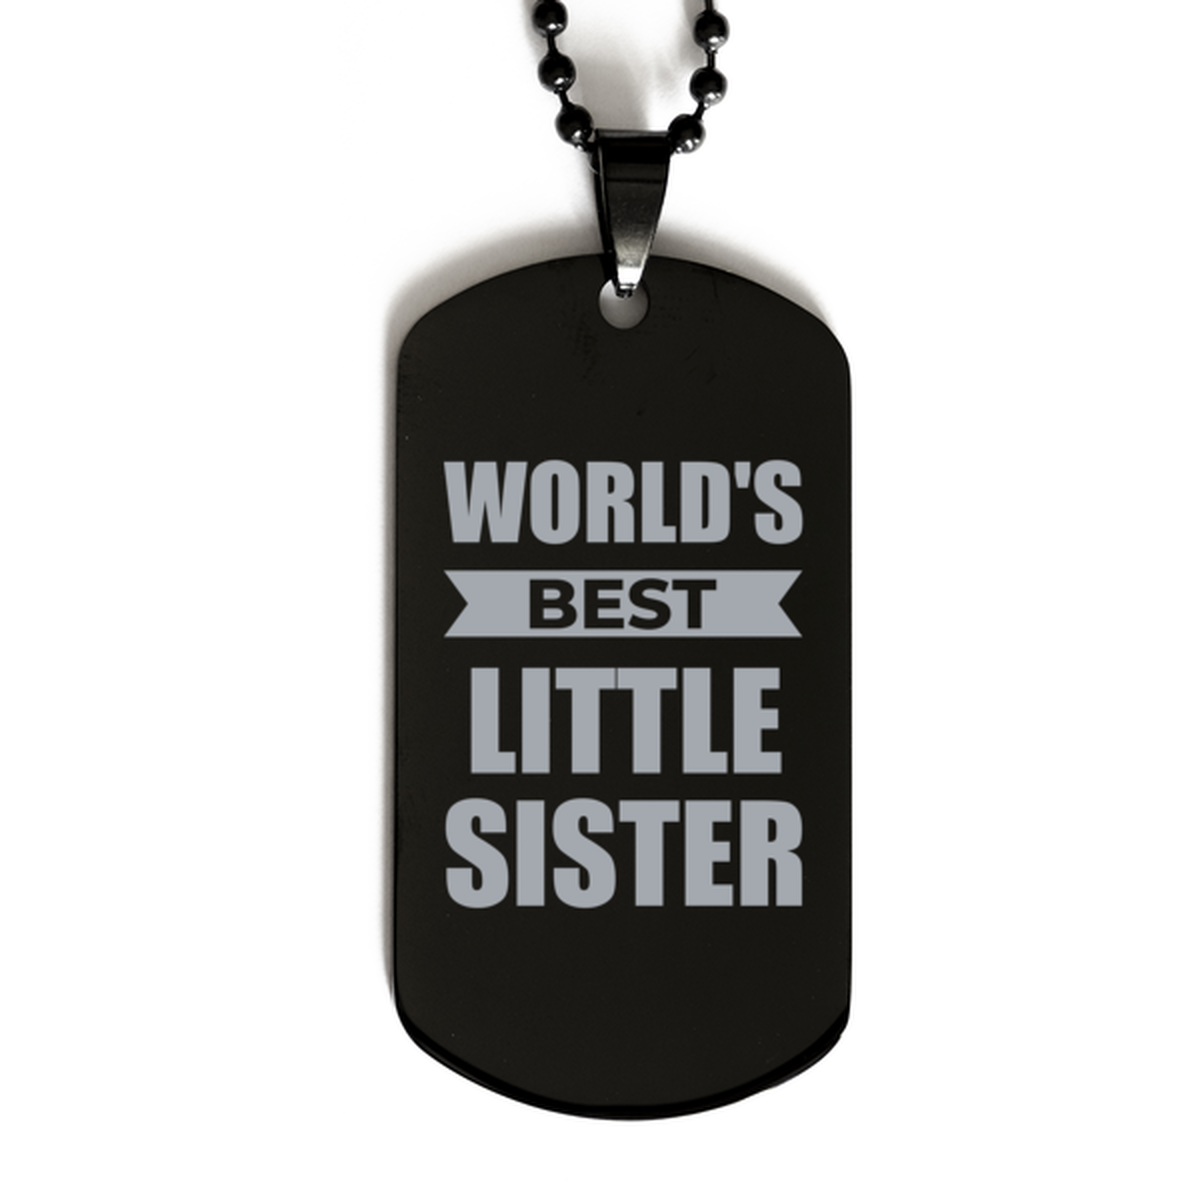 Worlds Best Little Sister Gifts, Funny Black Engraved Dog Tag For Little Sister, Birthday Presents For Women